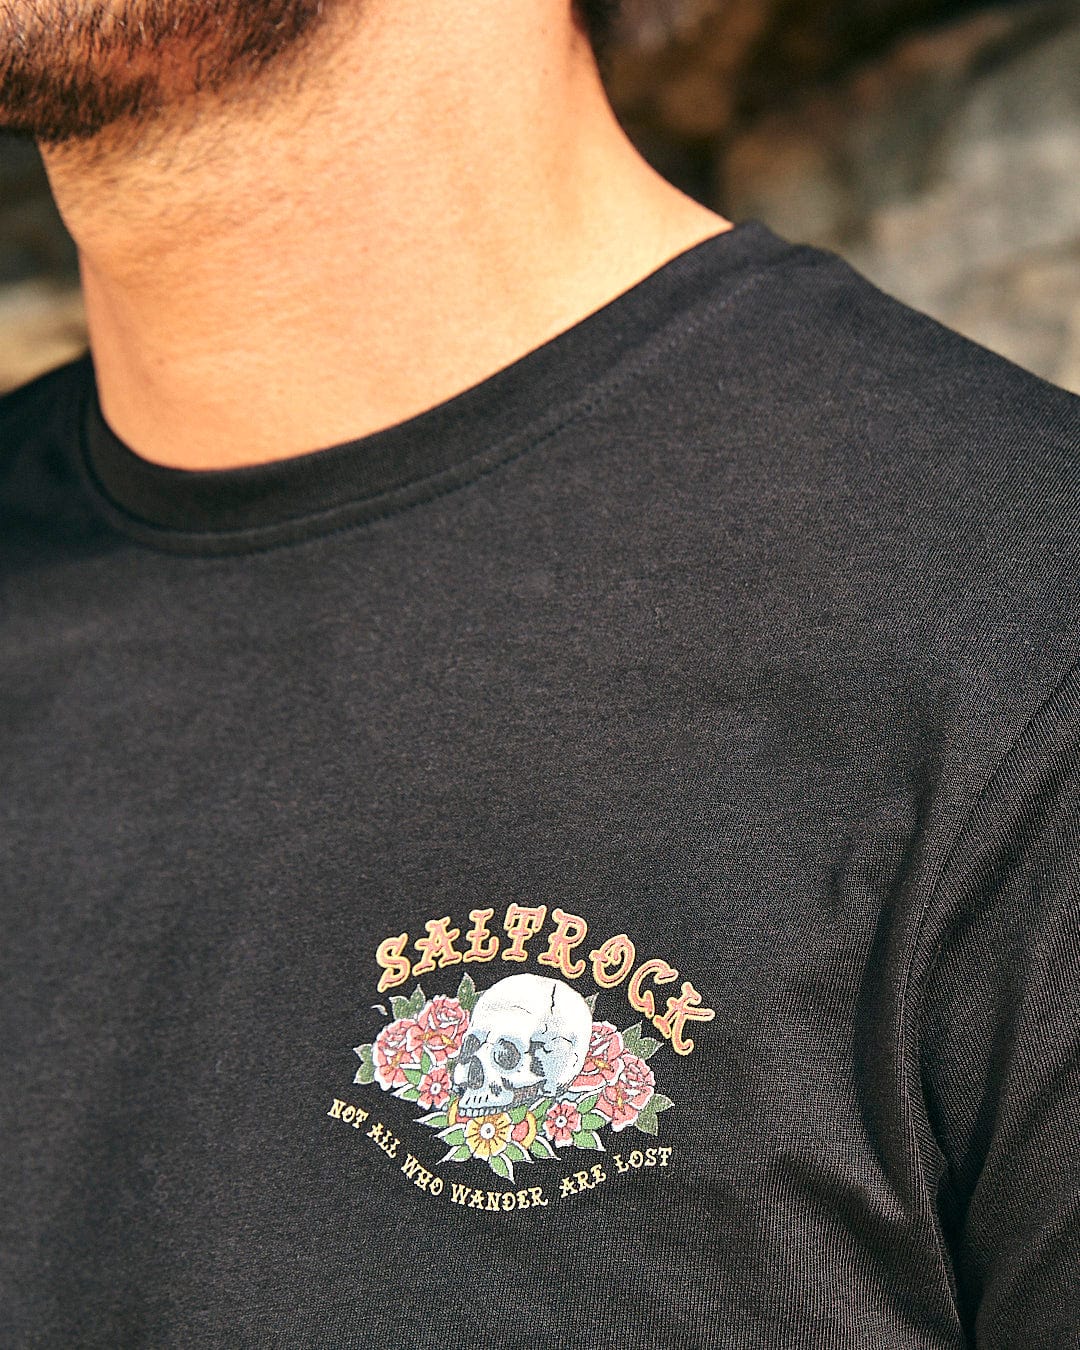 A man wearing a Saltrock Tattoo Island - Mens Short Sleeve T-Shirt - Black with roses on it.